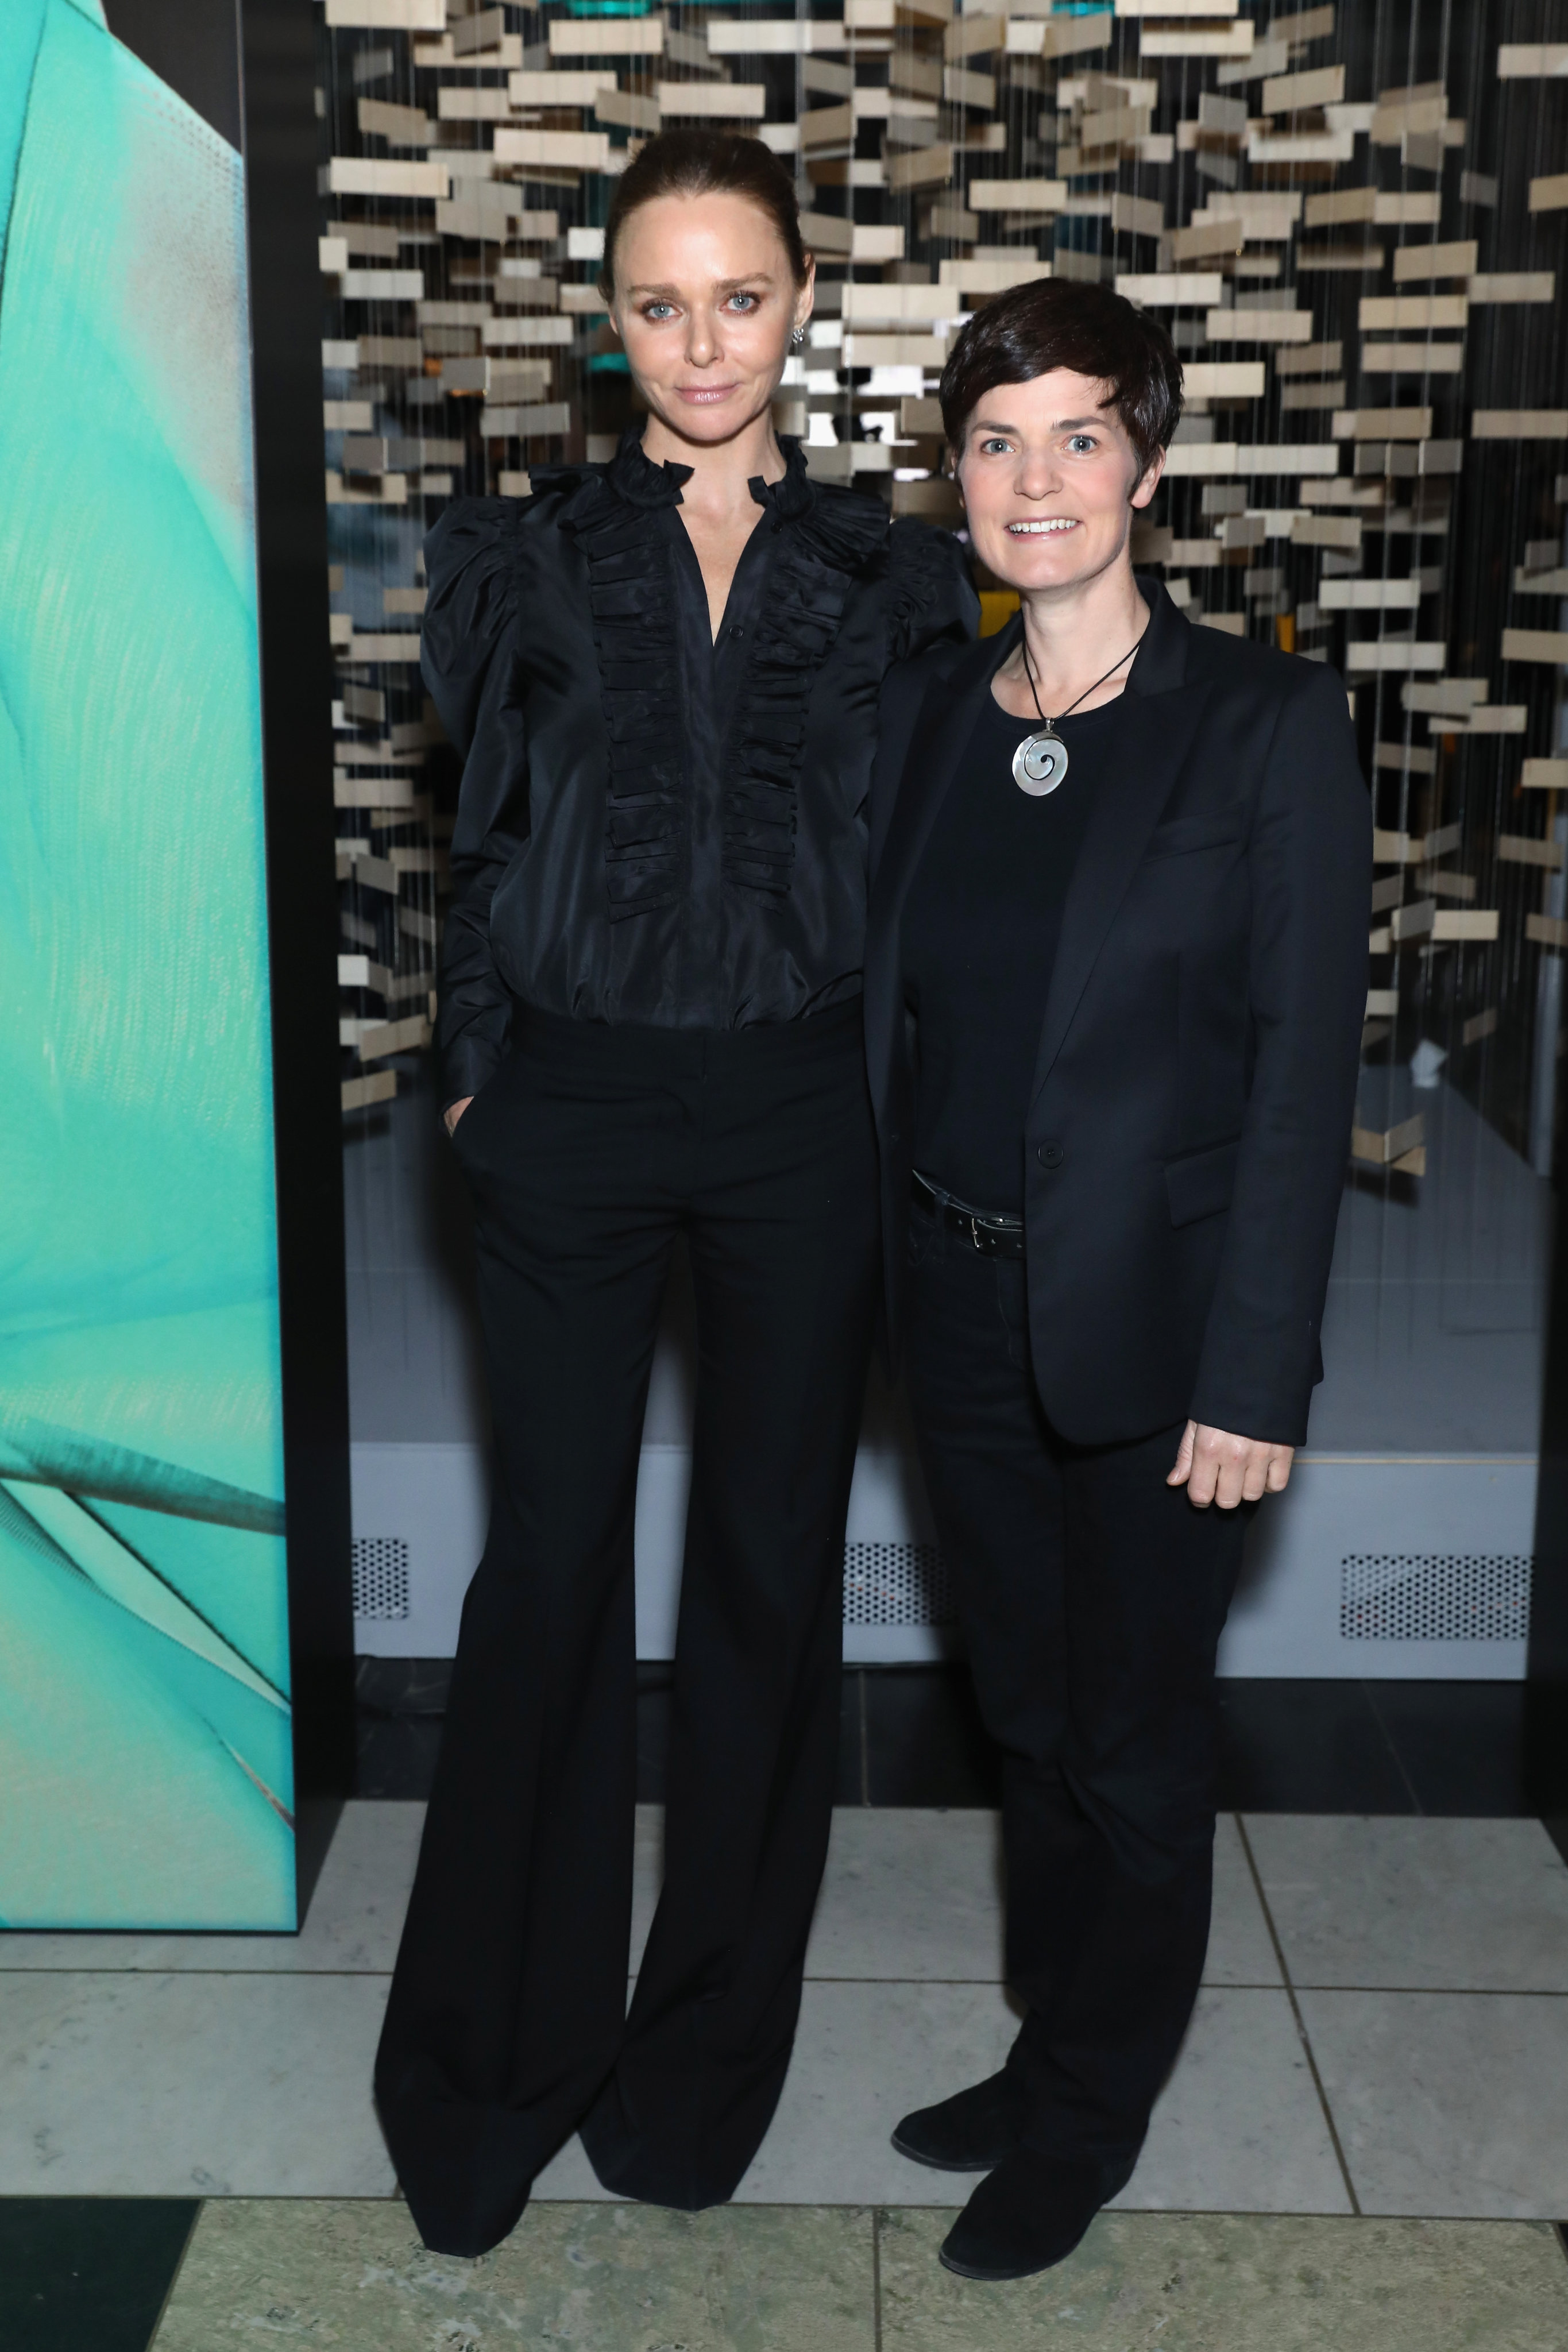 Fashion designer Stella McCartney (left) and Ellen MacArthur, founder of the Ellen MacArthur Foundation. Its new book, Circular Design for Fashion, contains ideas for reducing fashion’s environmental footprint. Photo: Darren Gerrish/Getty Images